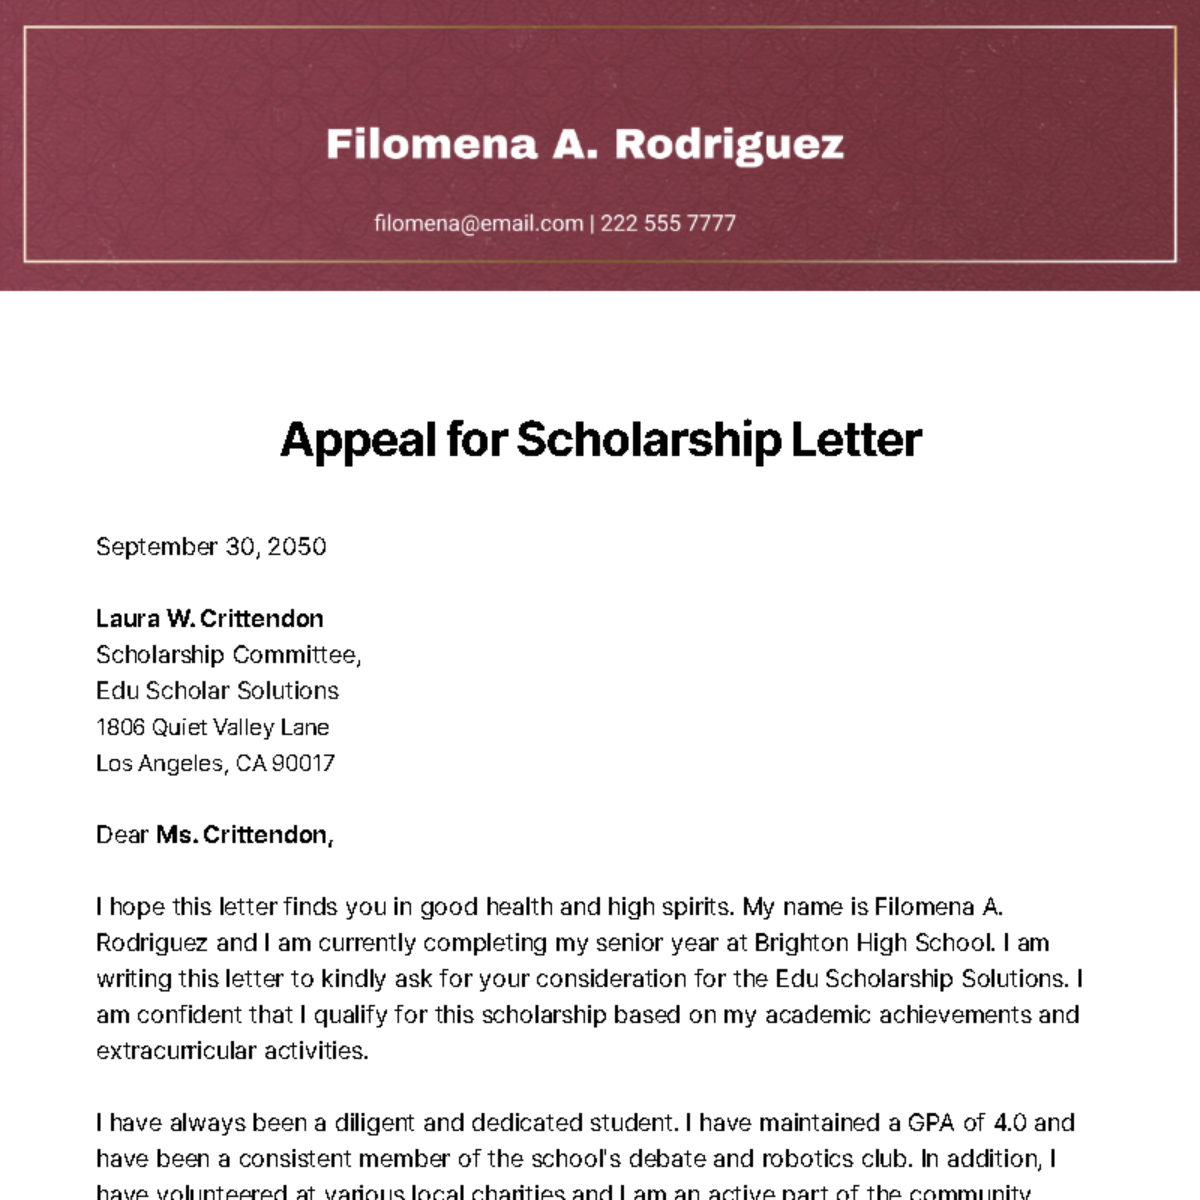 Appeal for Scholarship Letter Template